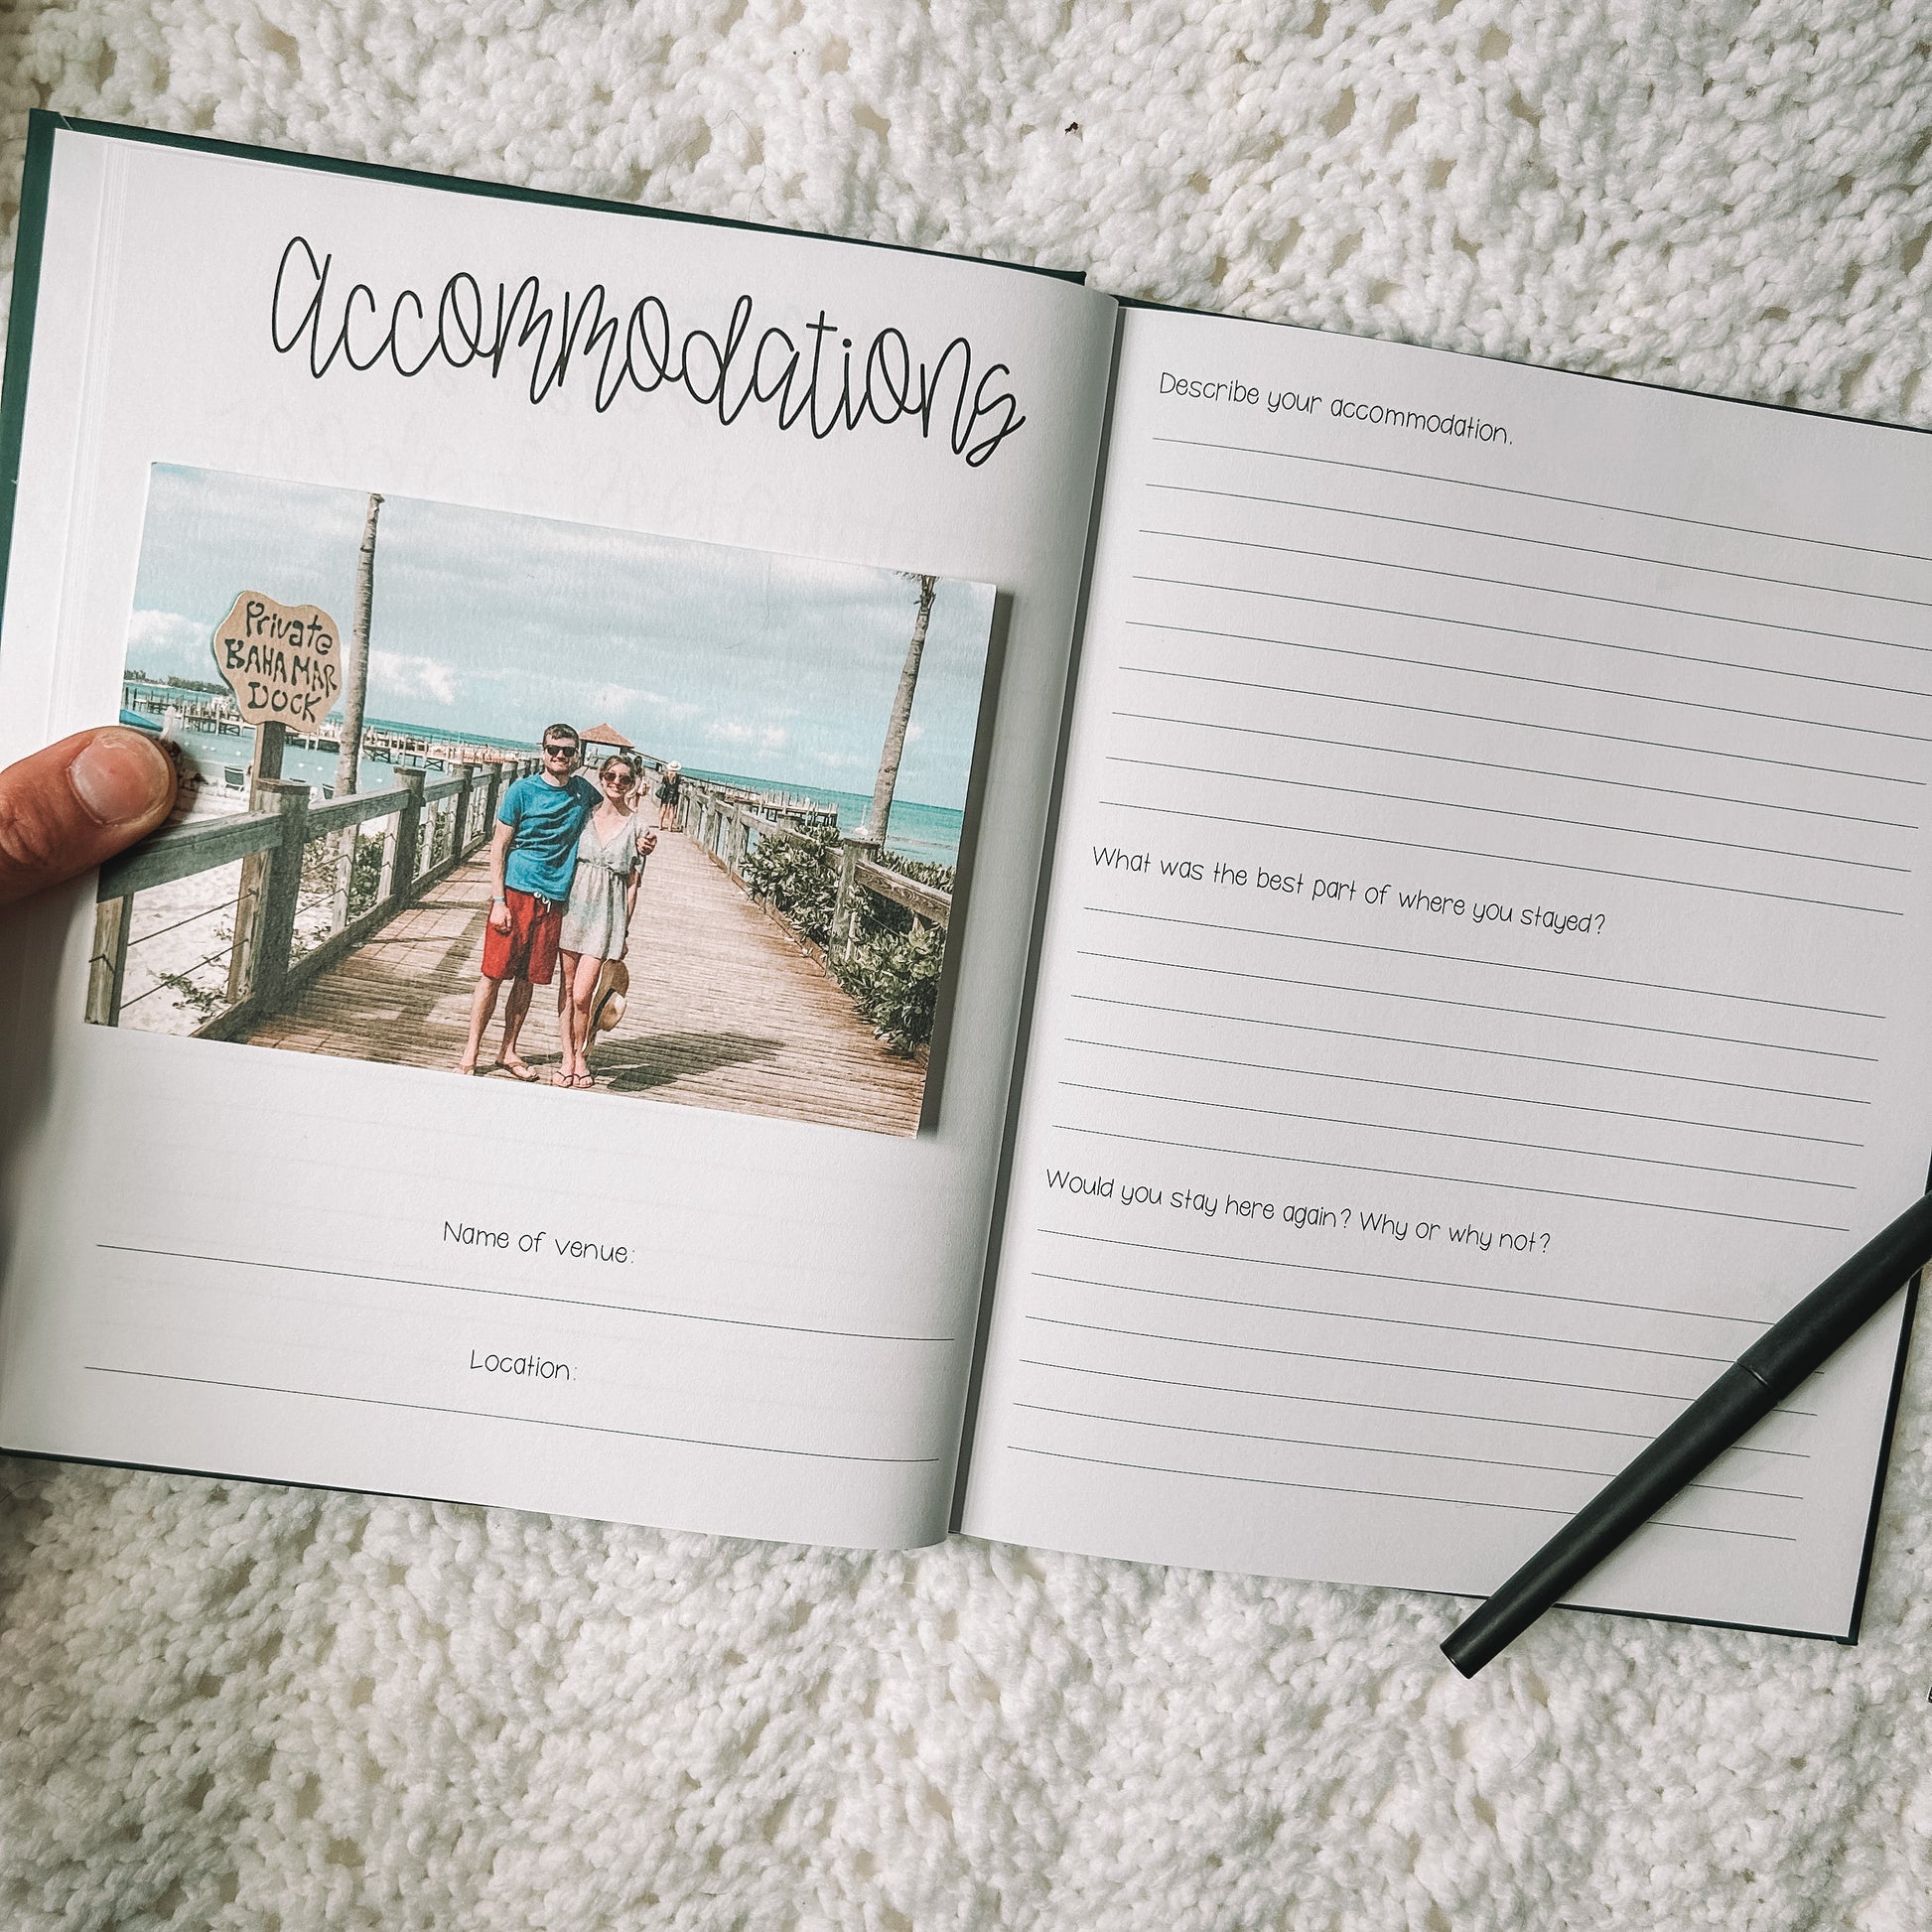 Accommodations has a two page spread. Lefthand side has space for a photo, the name of the venue, and the location. Righthand side has three primos about the accommodation with ample lined space to record answers.